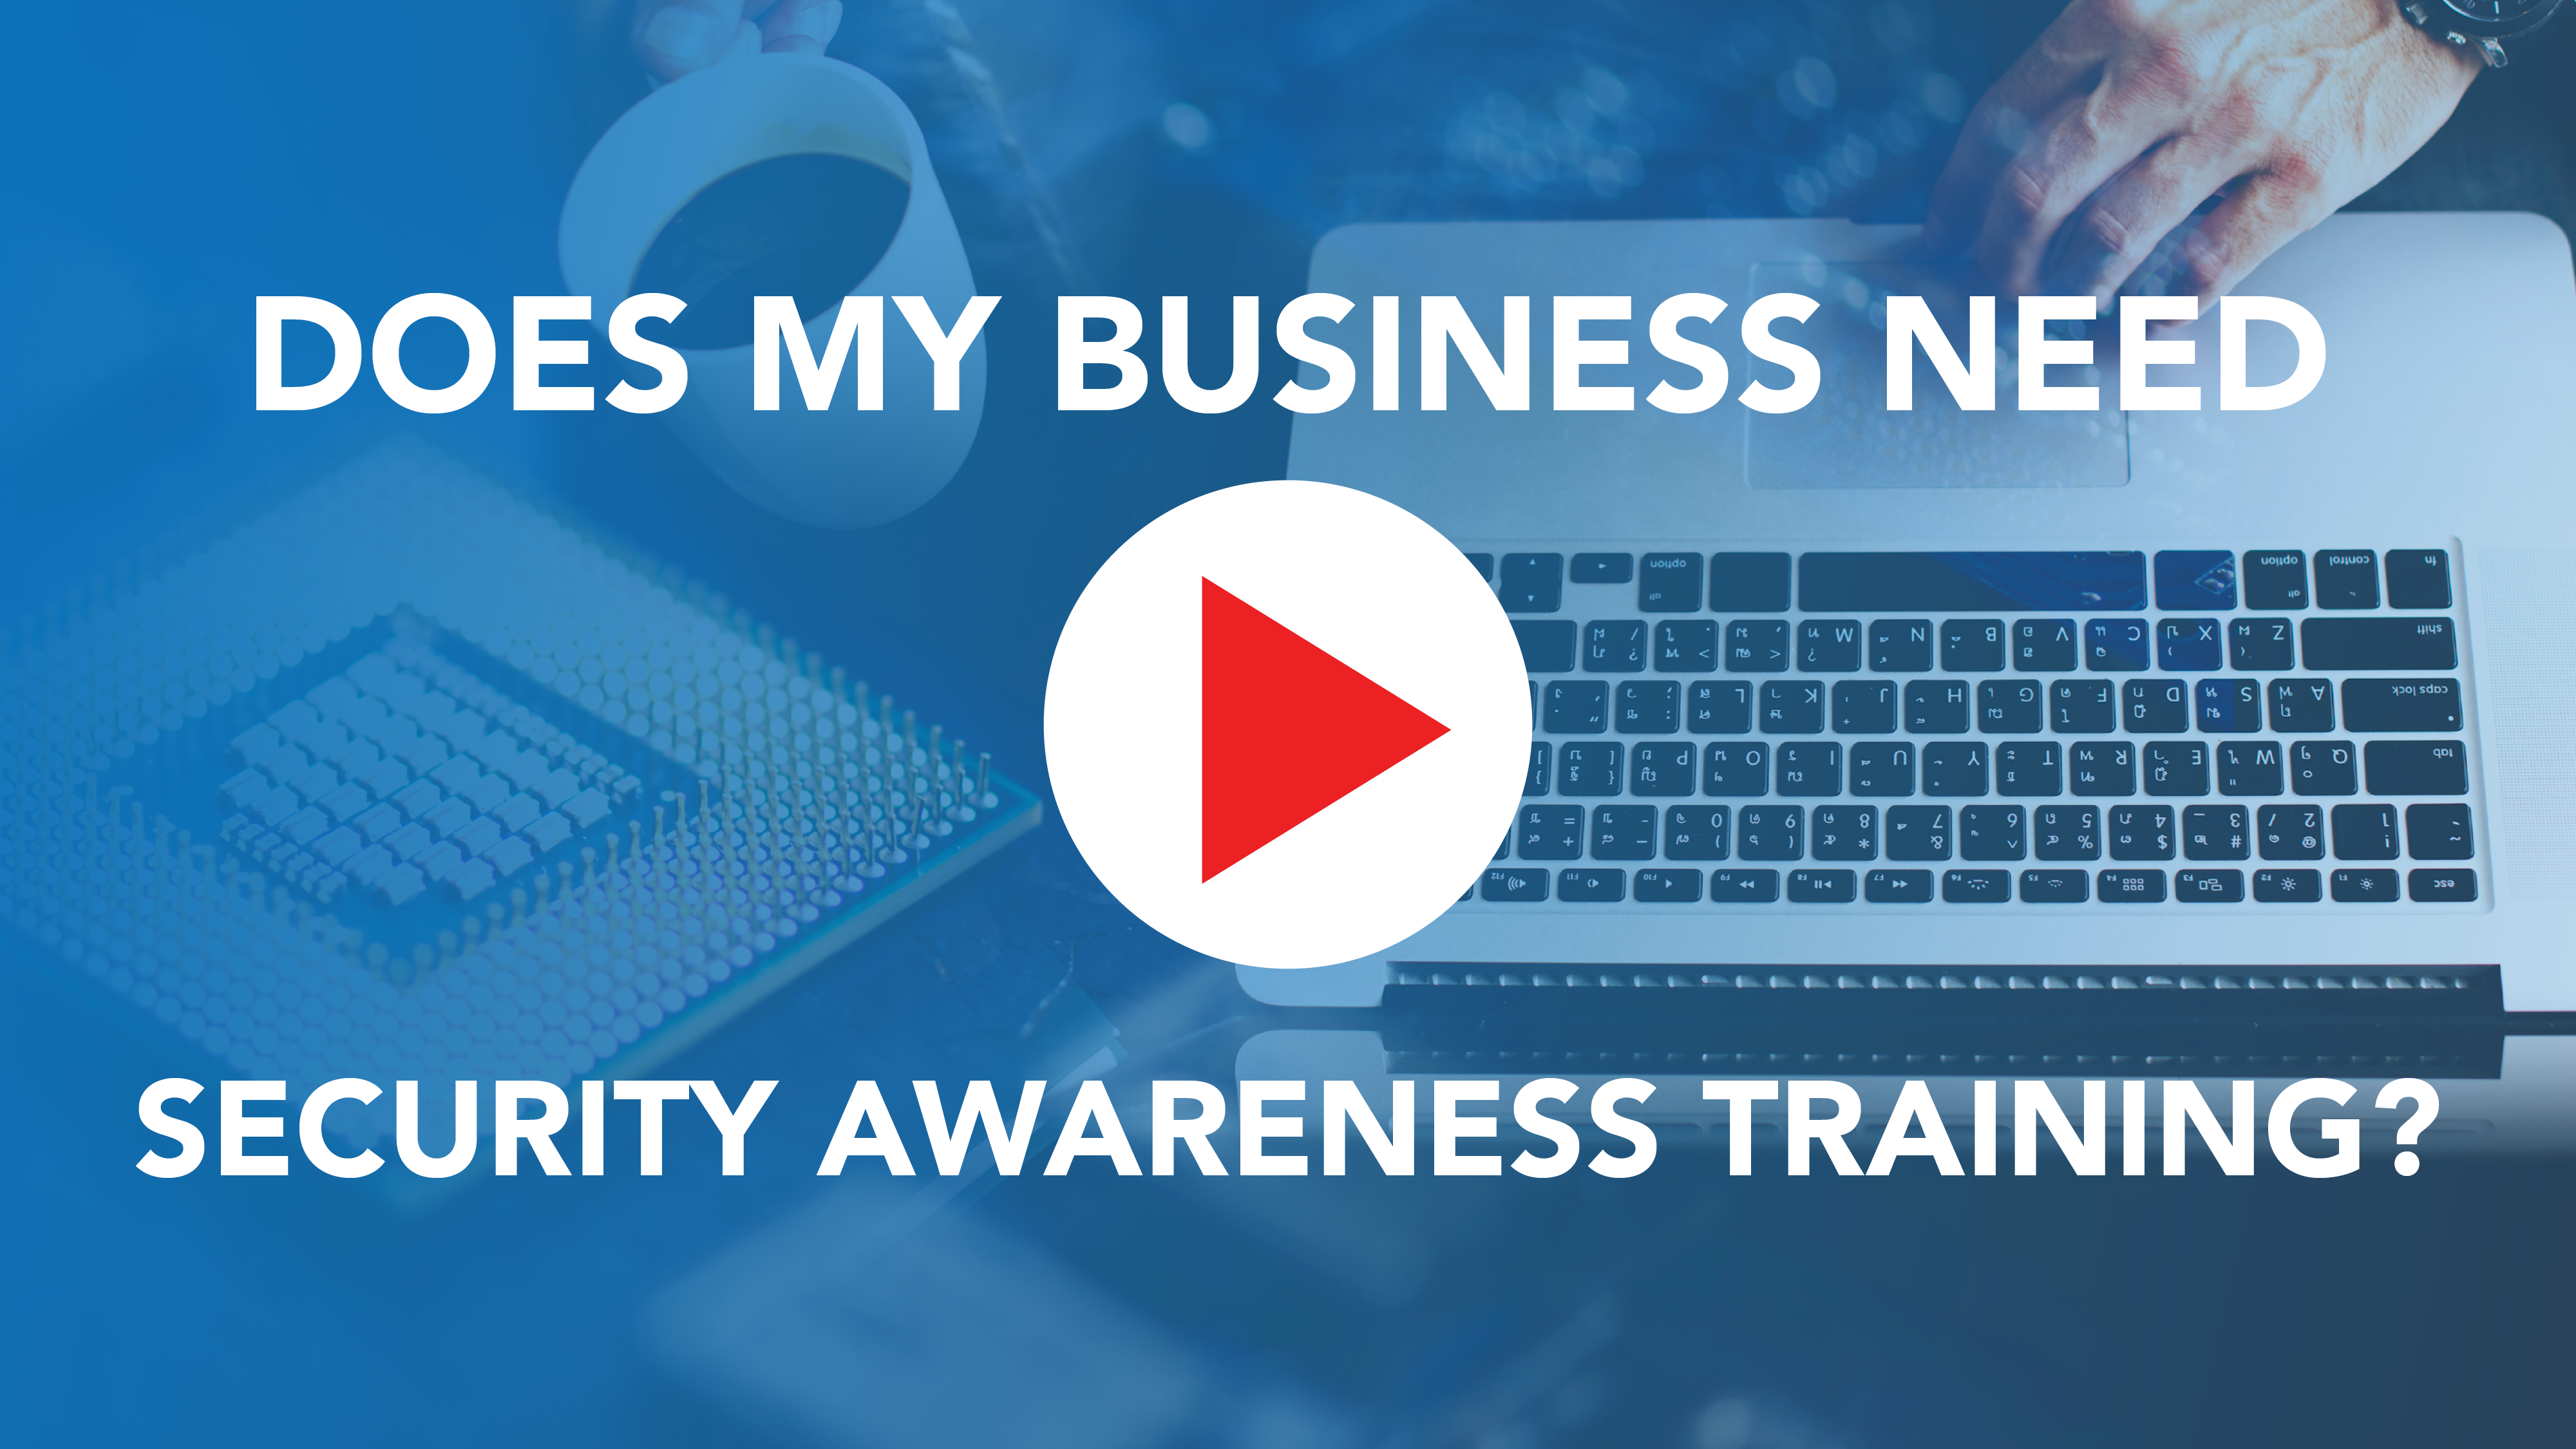 Does My Business Need Security Awareness Training?